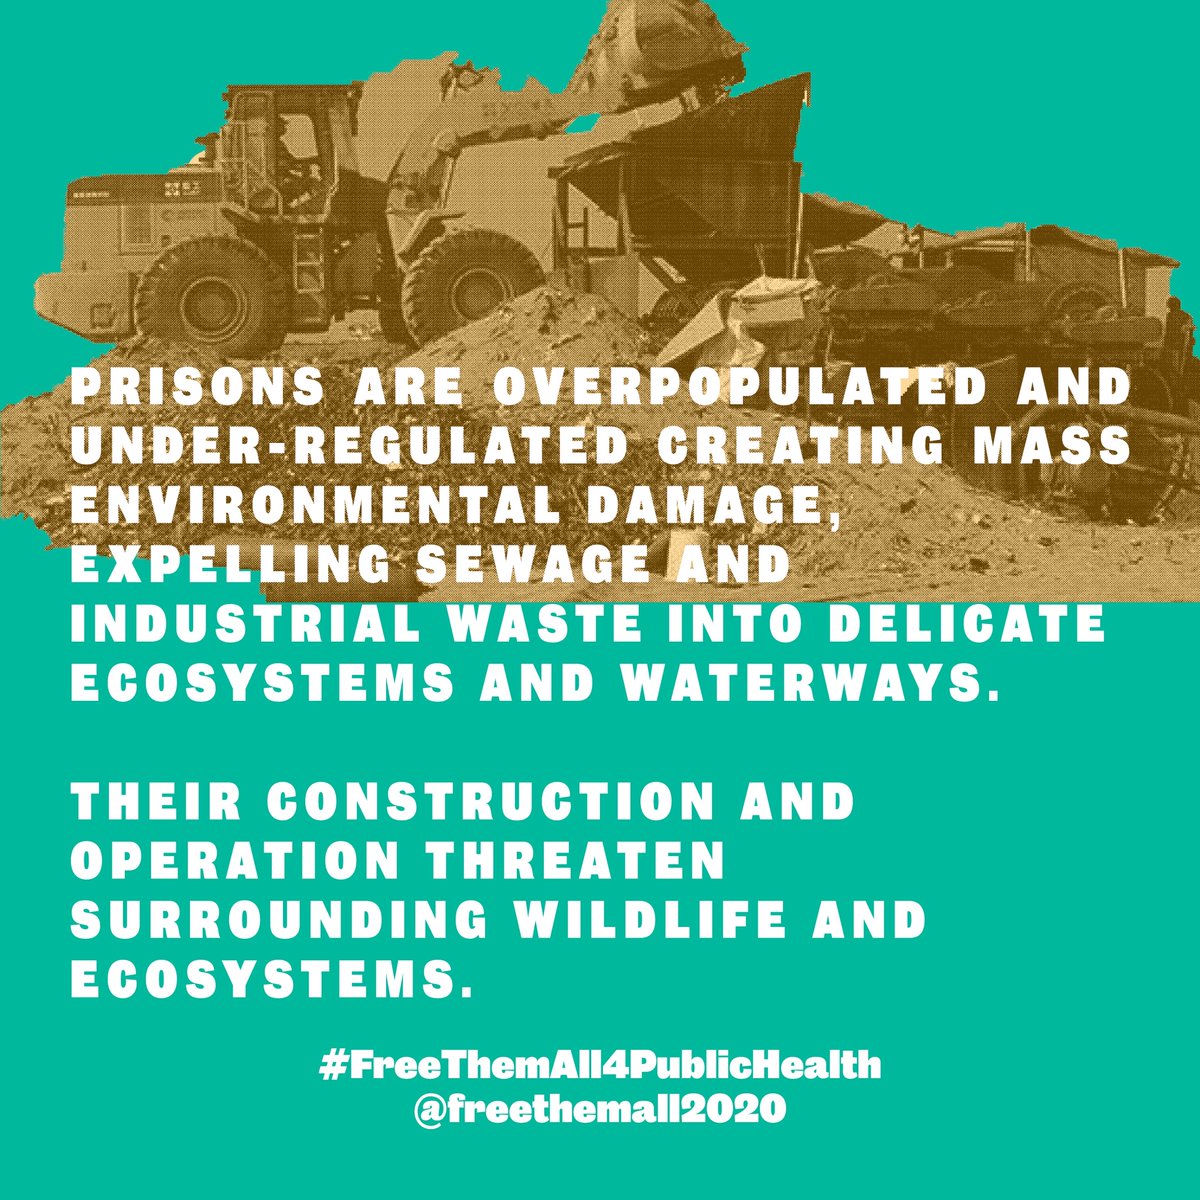 Prisons are overpopulated and under-regulated creating mass environmental damage, expelling sewage, and industrial waste into delicate ecosystems and waterways. Their construction and operation threaten surrounding wildlife and ecosystems.